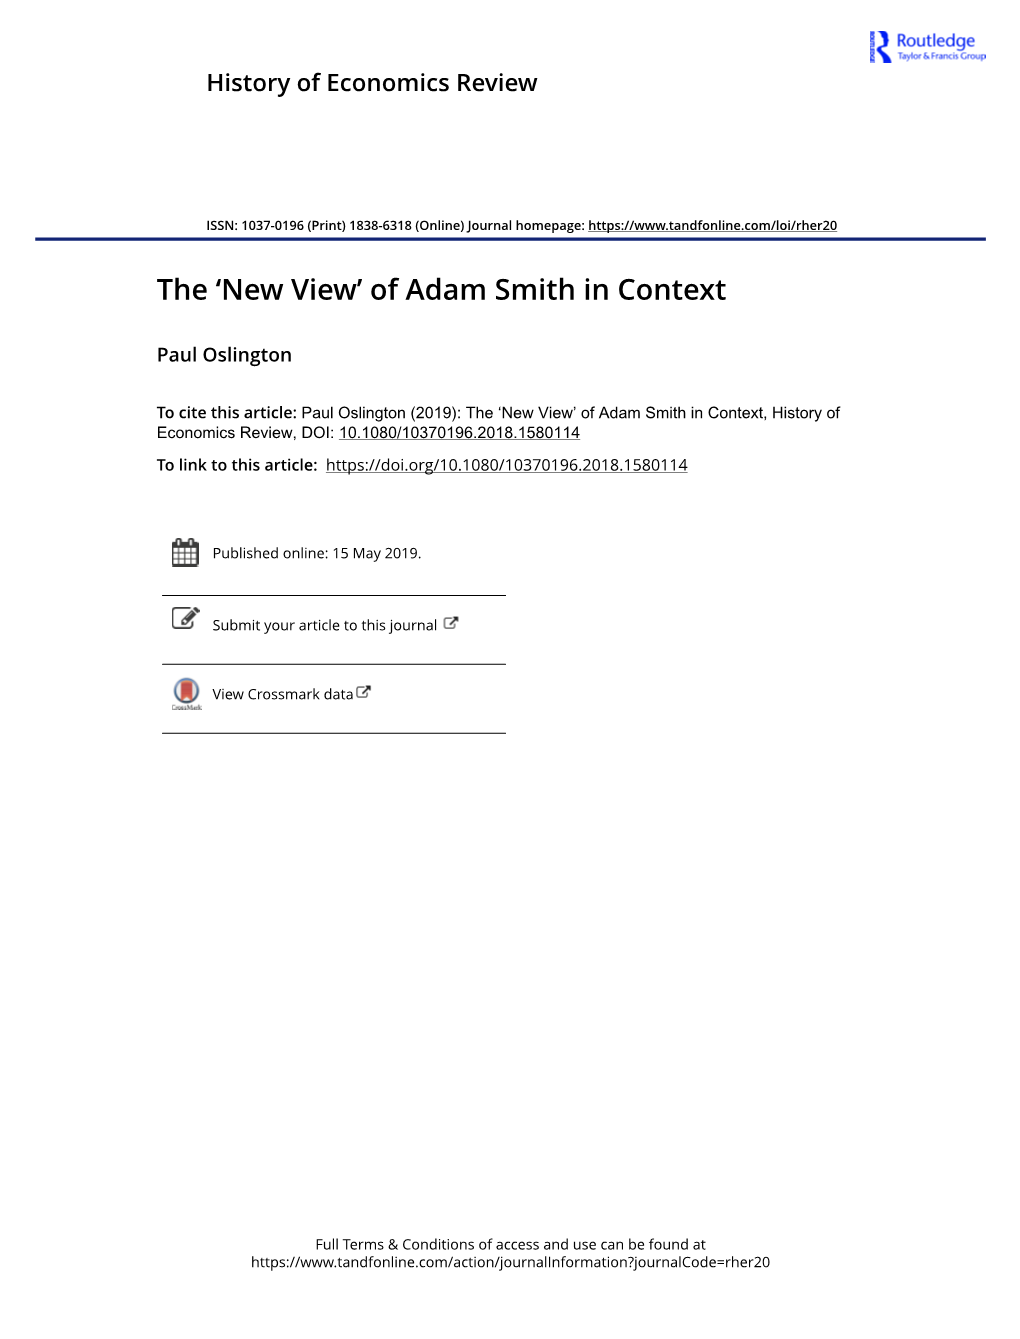 Of Adam Smith in Context